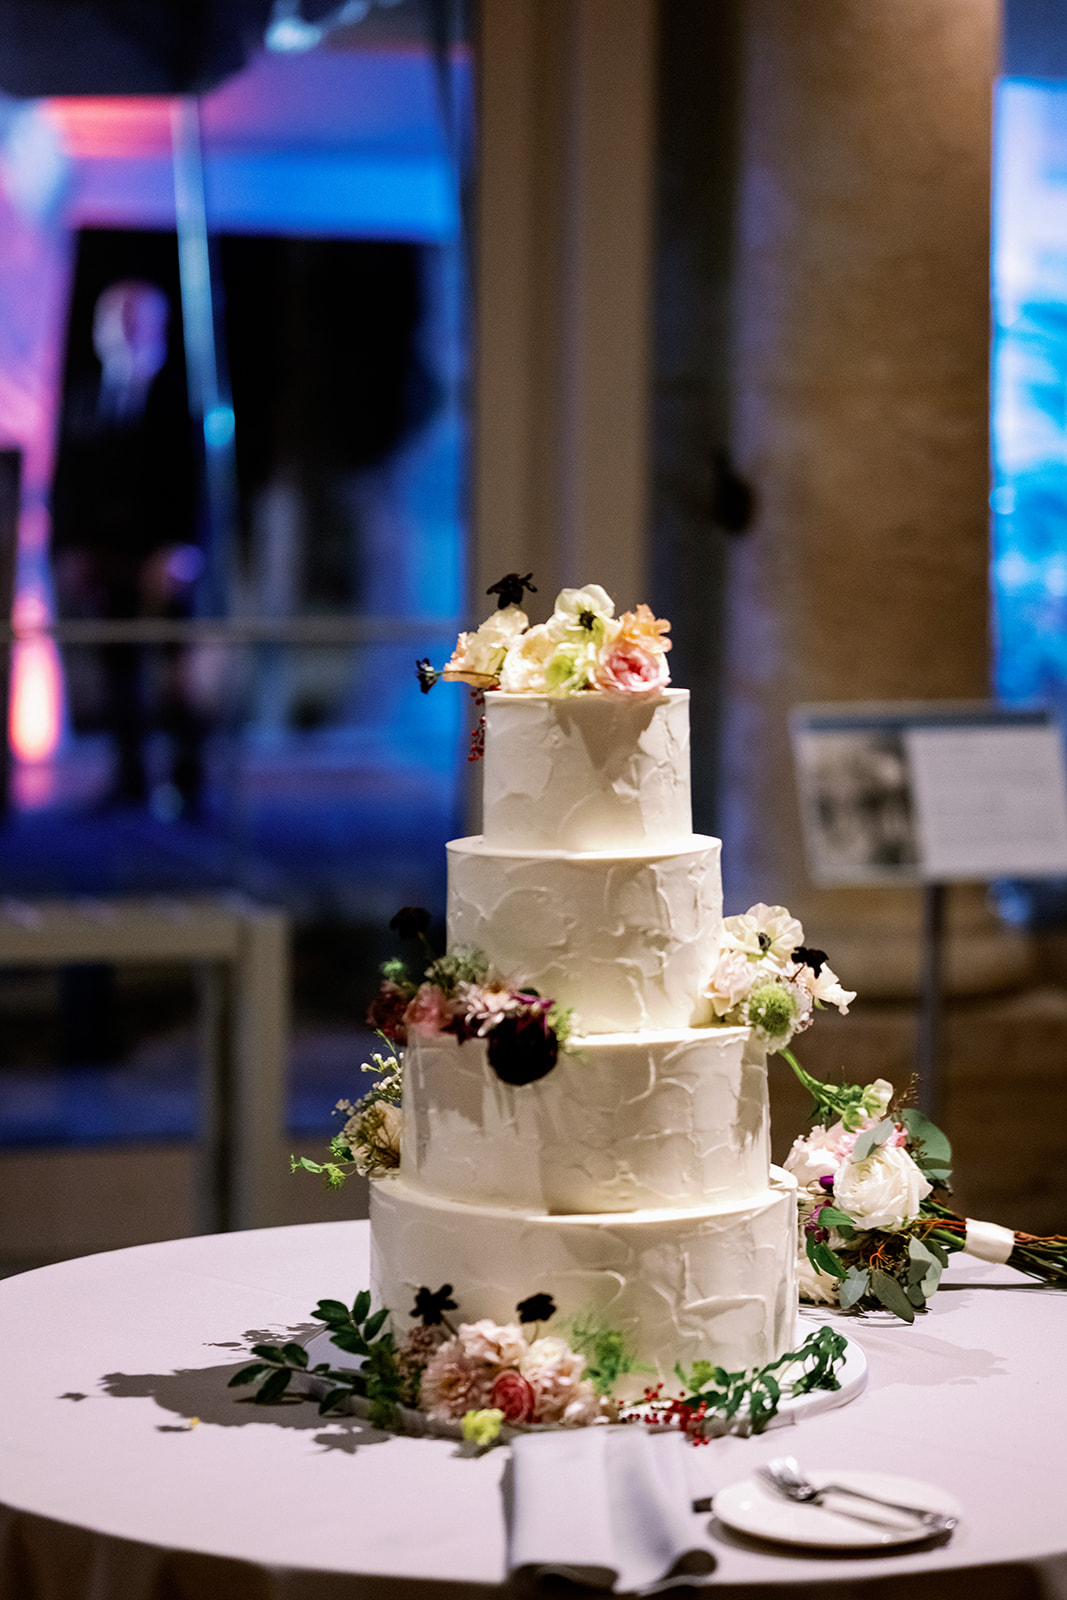 4-tier white wedding cake with flowers.